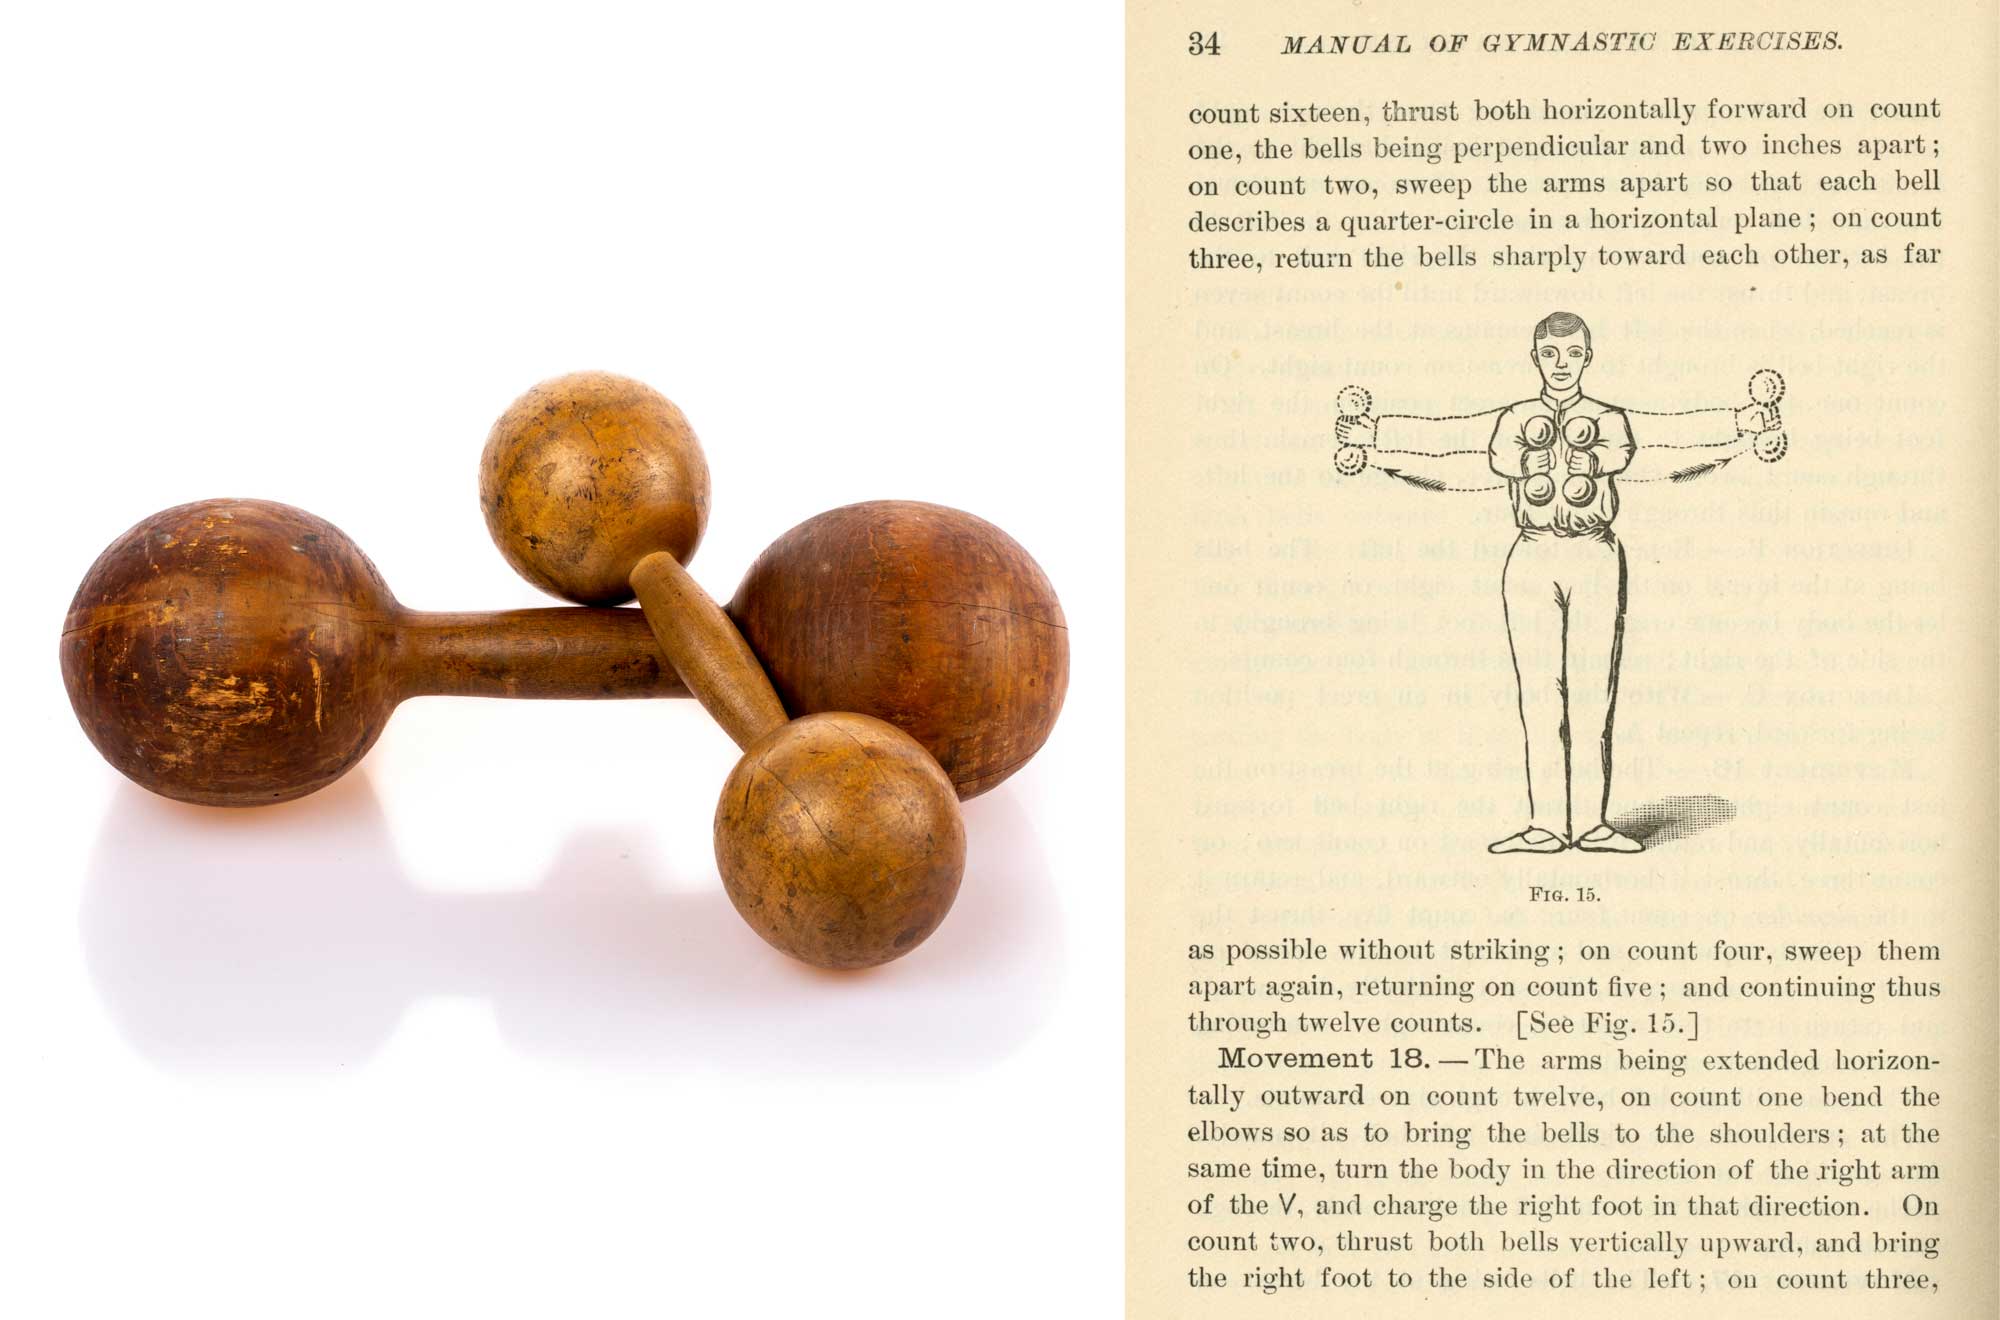 Small hand weights and a page from A Manual for Gymnastic Exercise